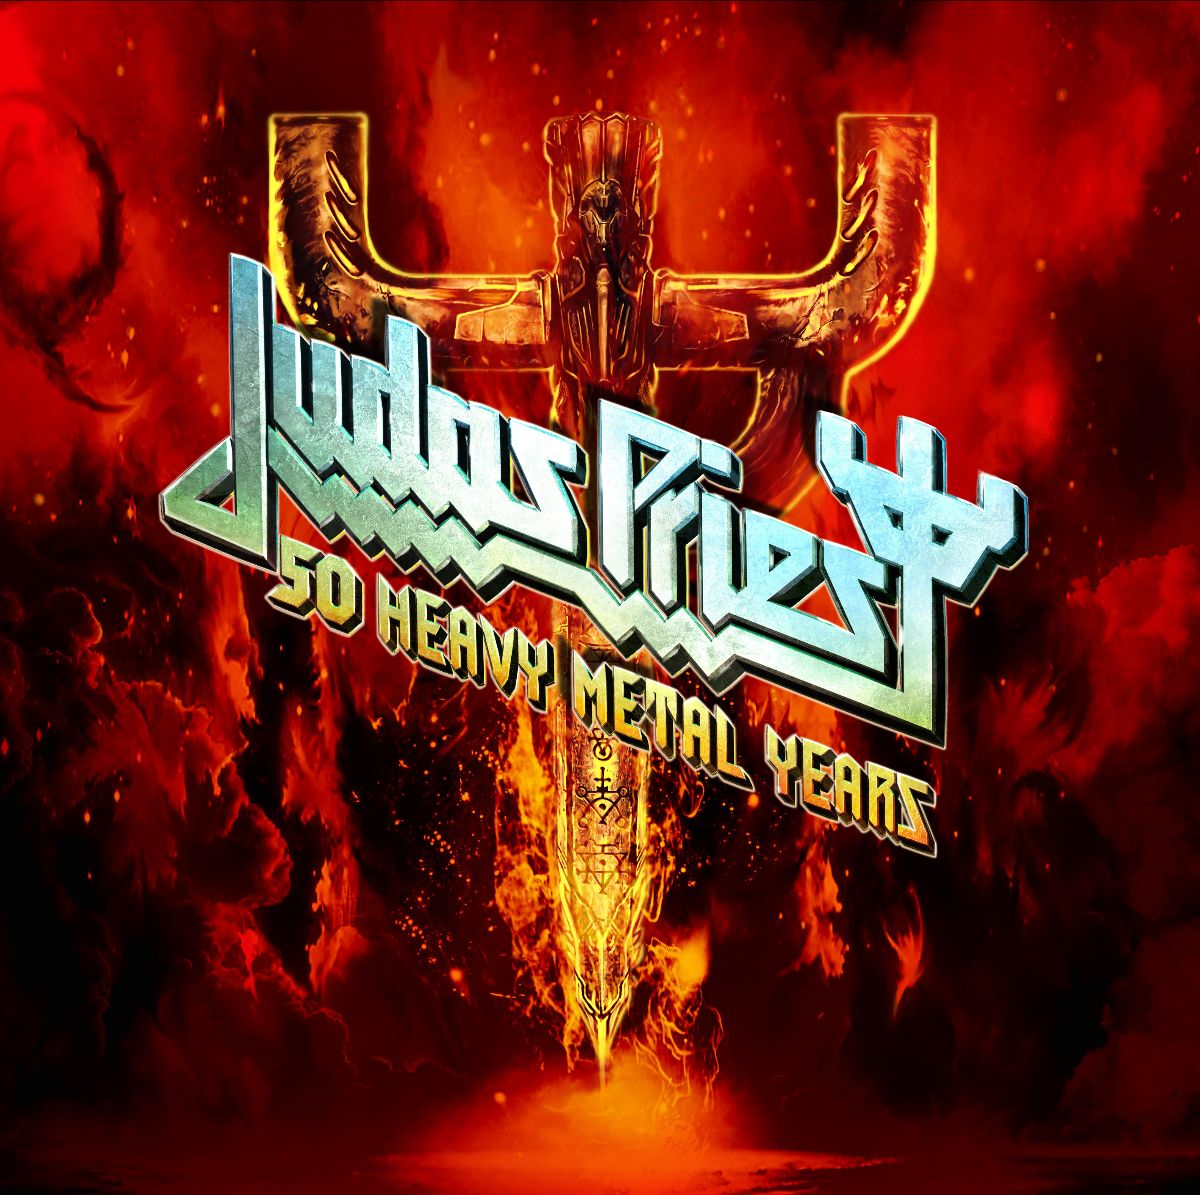 Judas Priest Celebrate their career with their first official book